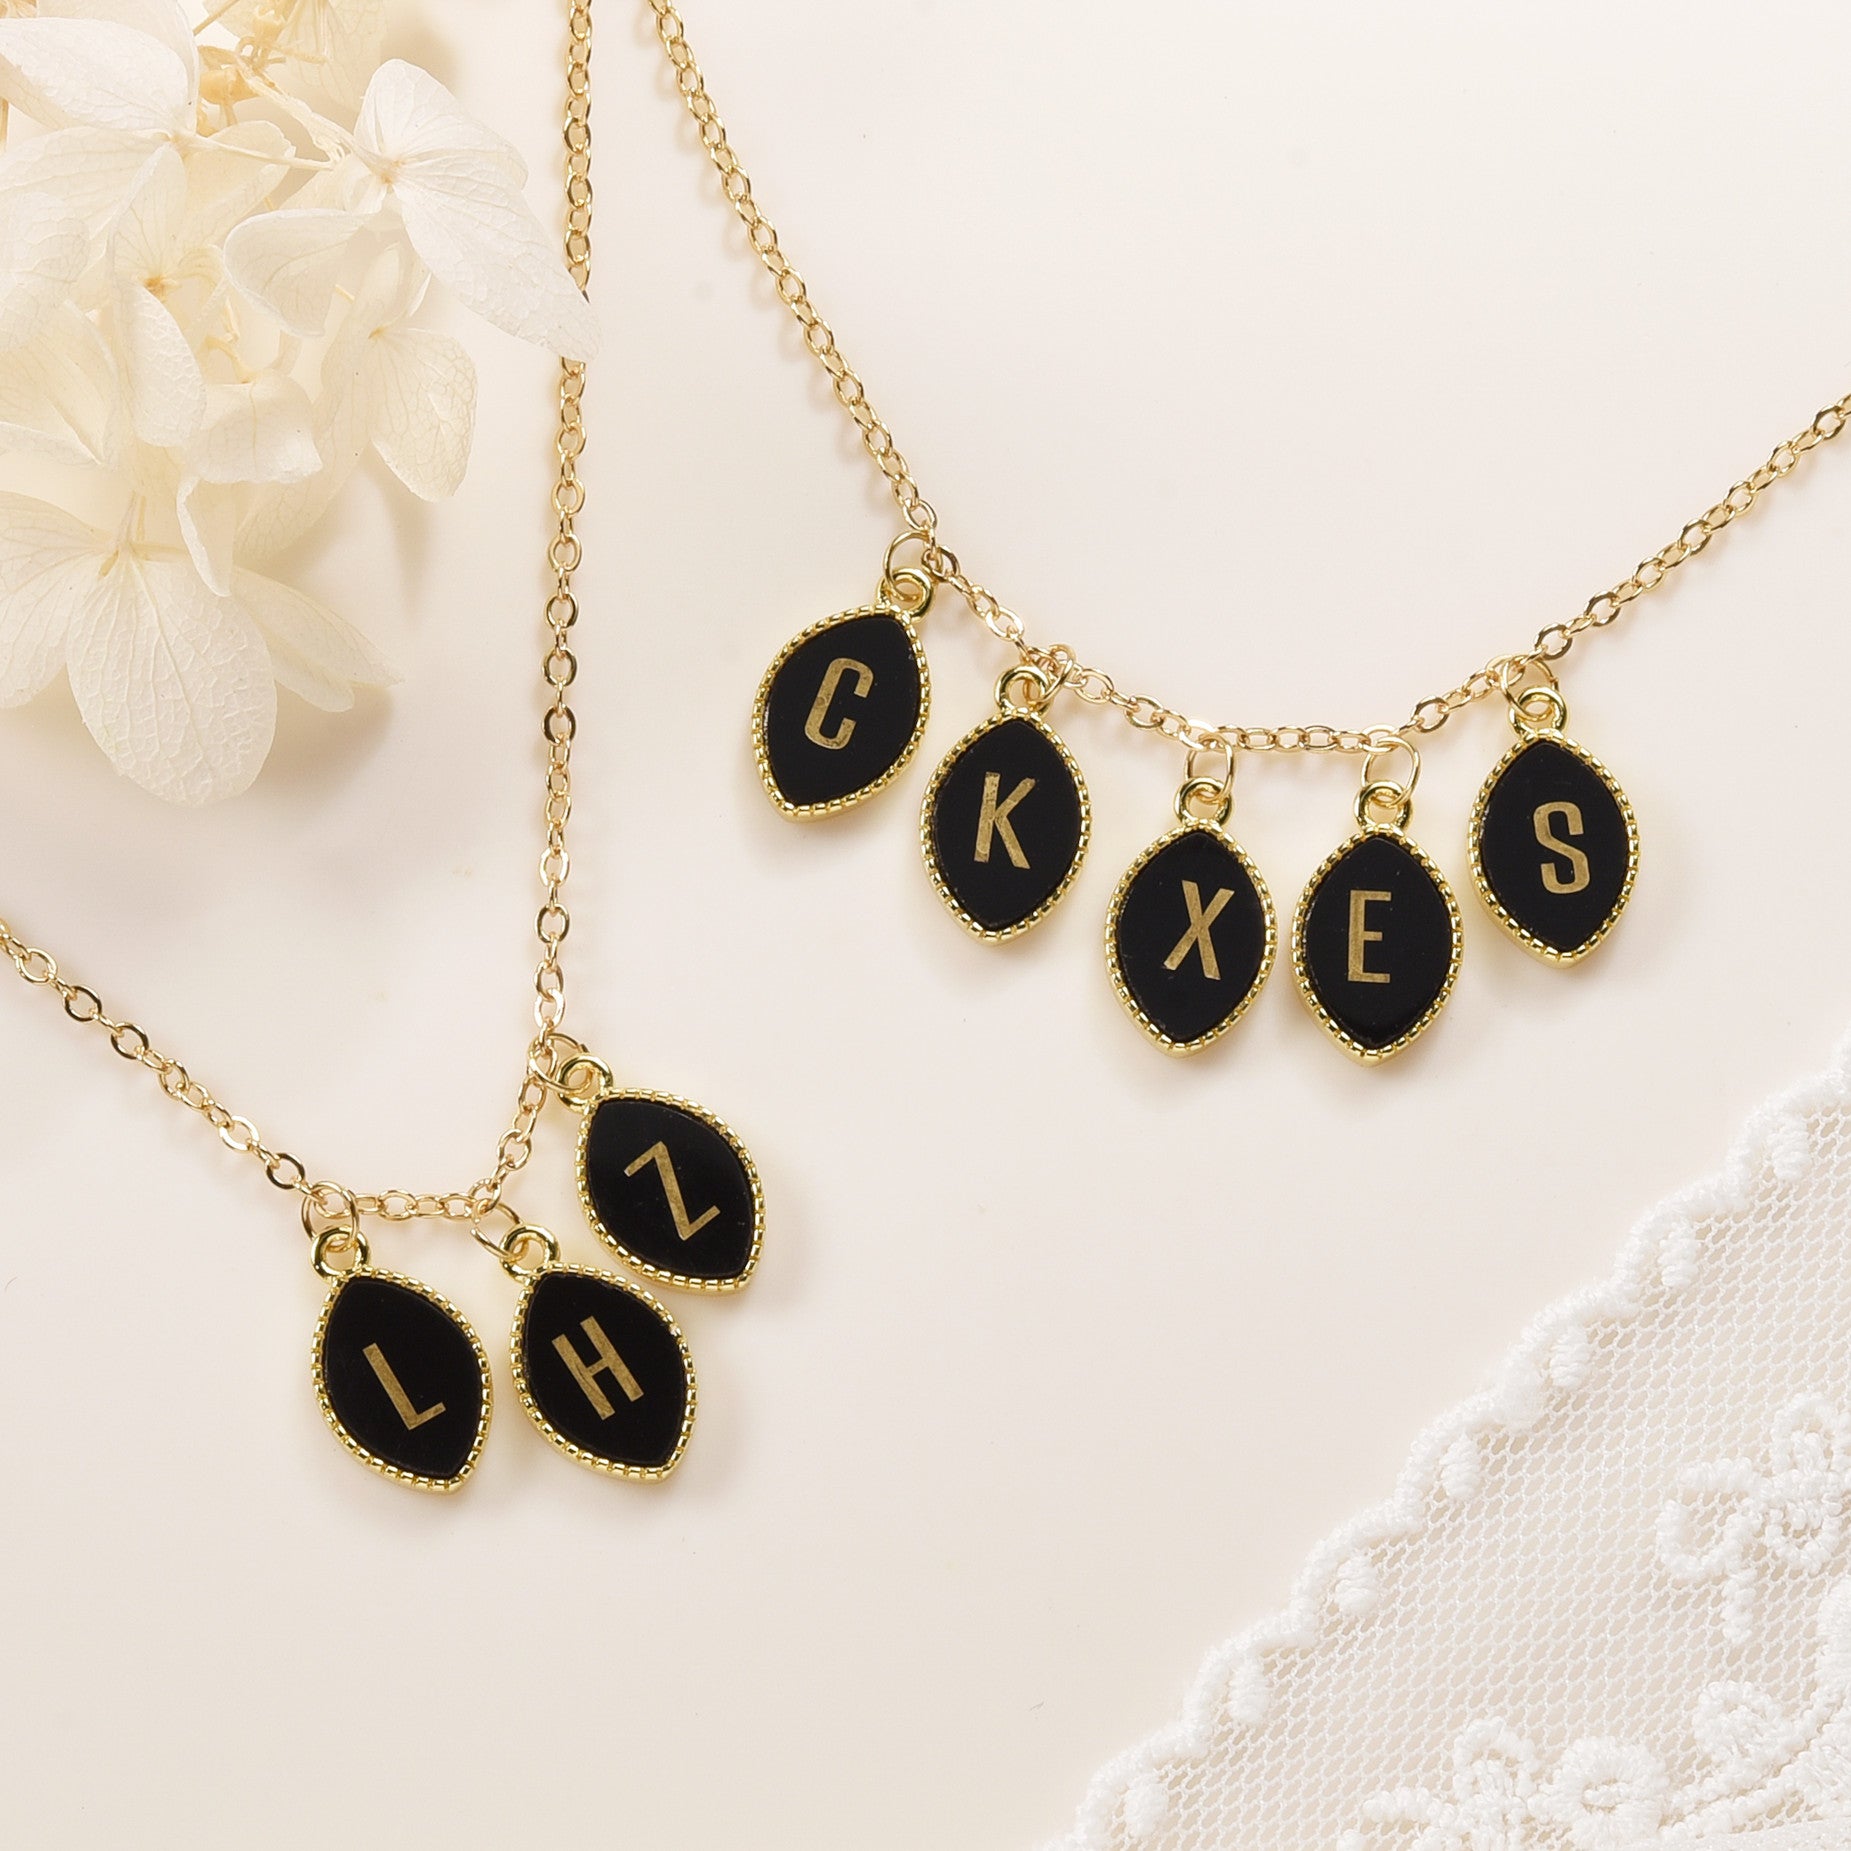 16" Gold Marquise Black Obsidian Carved Initial Letter Pendant Necklace, Personalization Jewelry KZ022